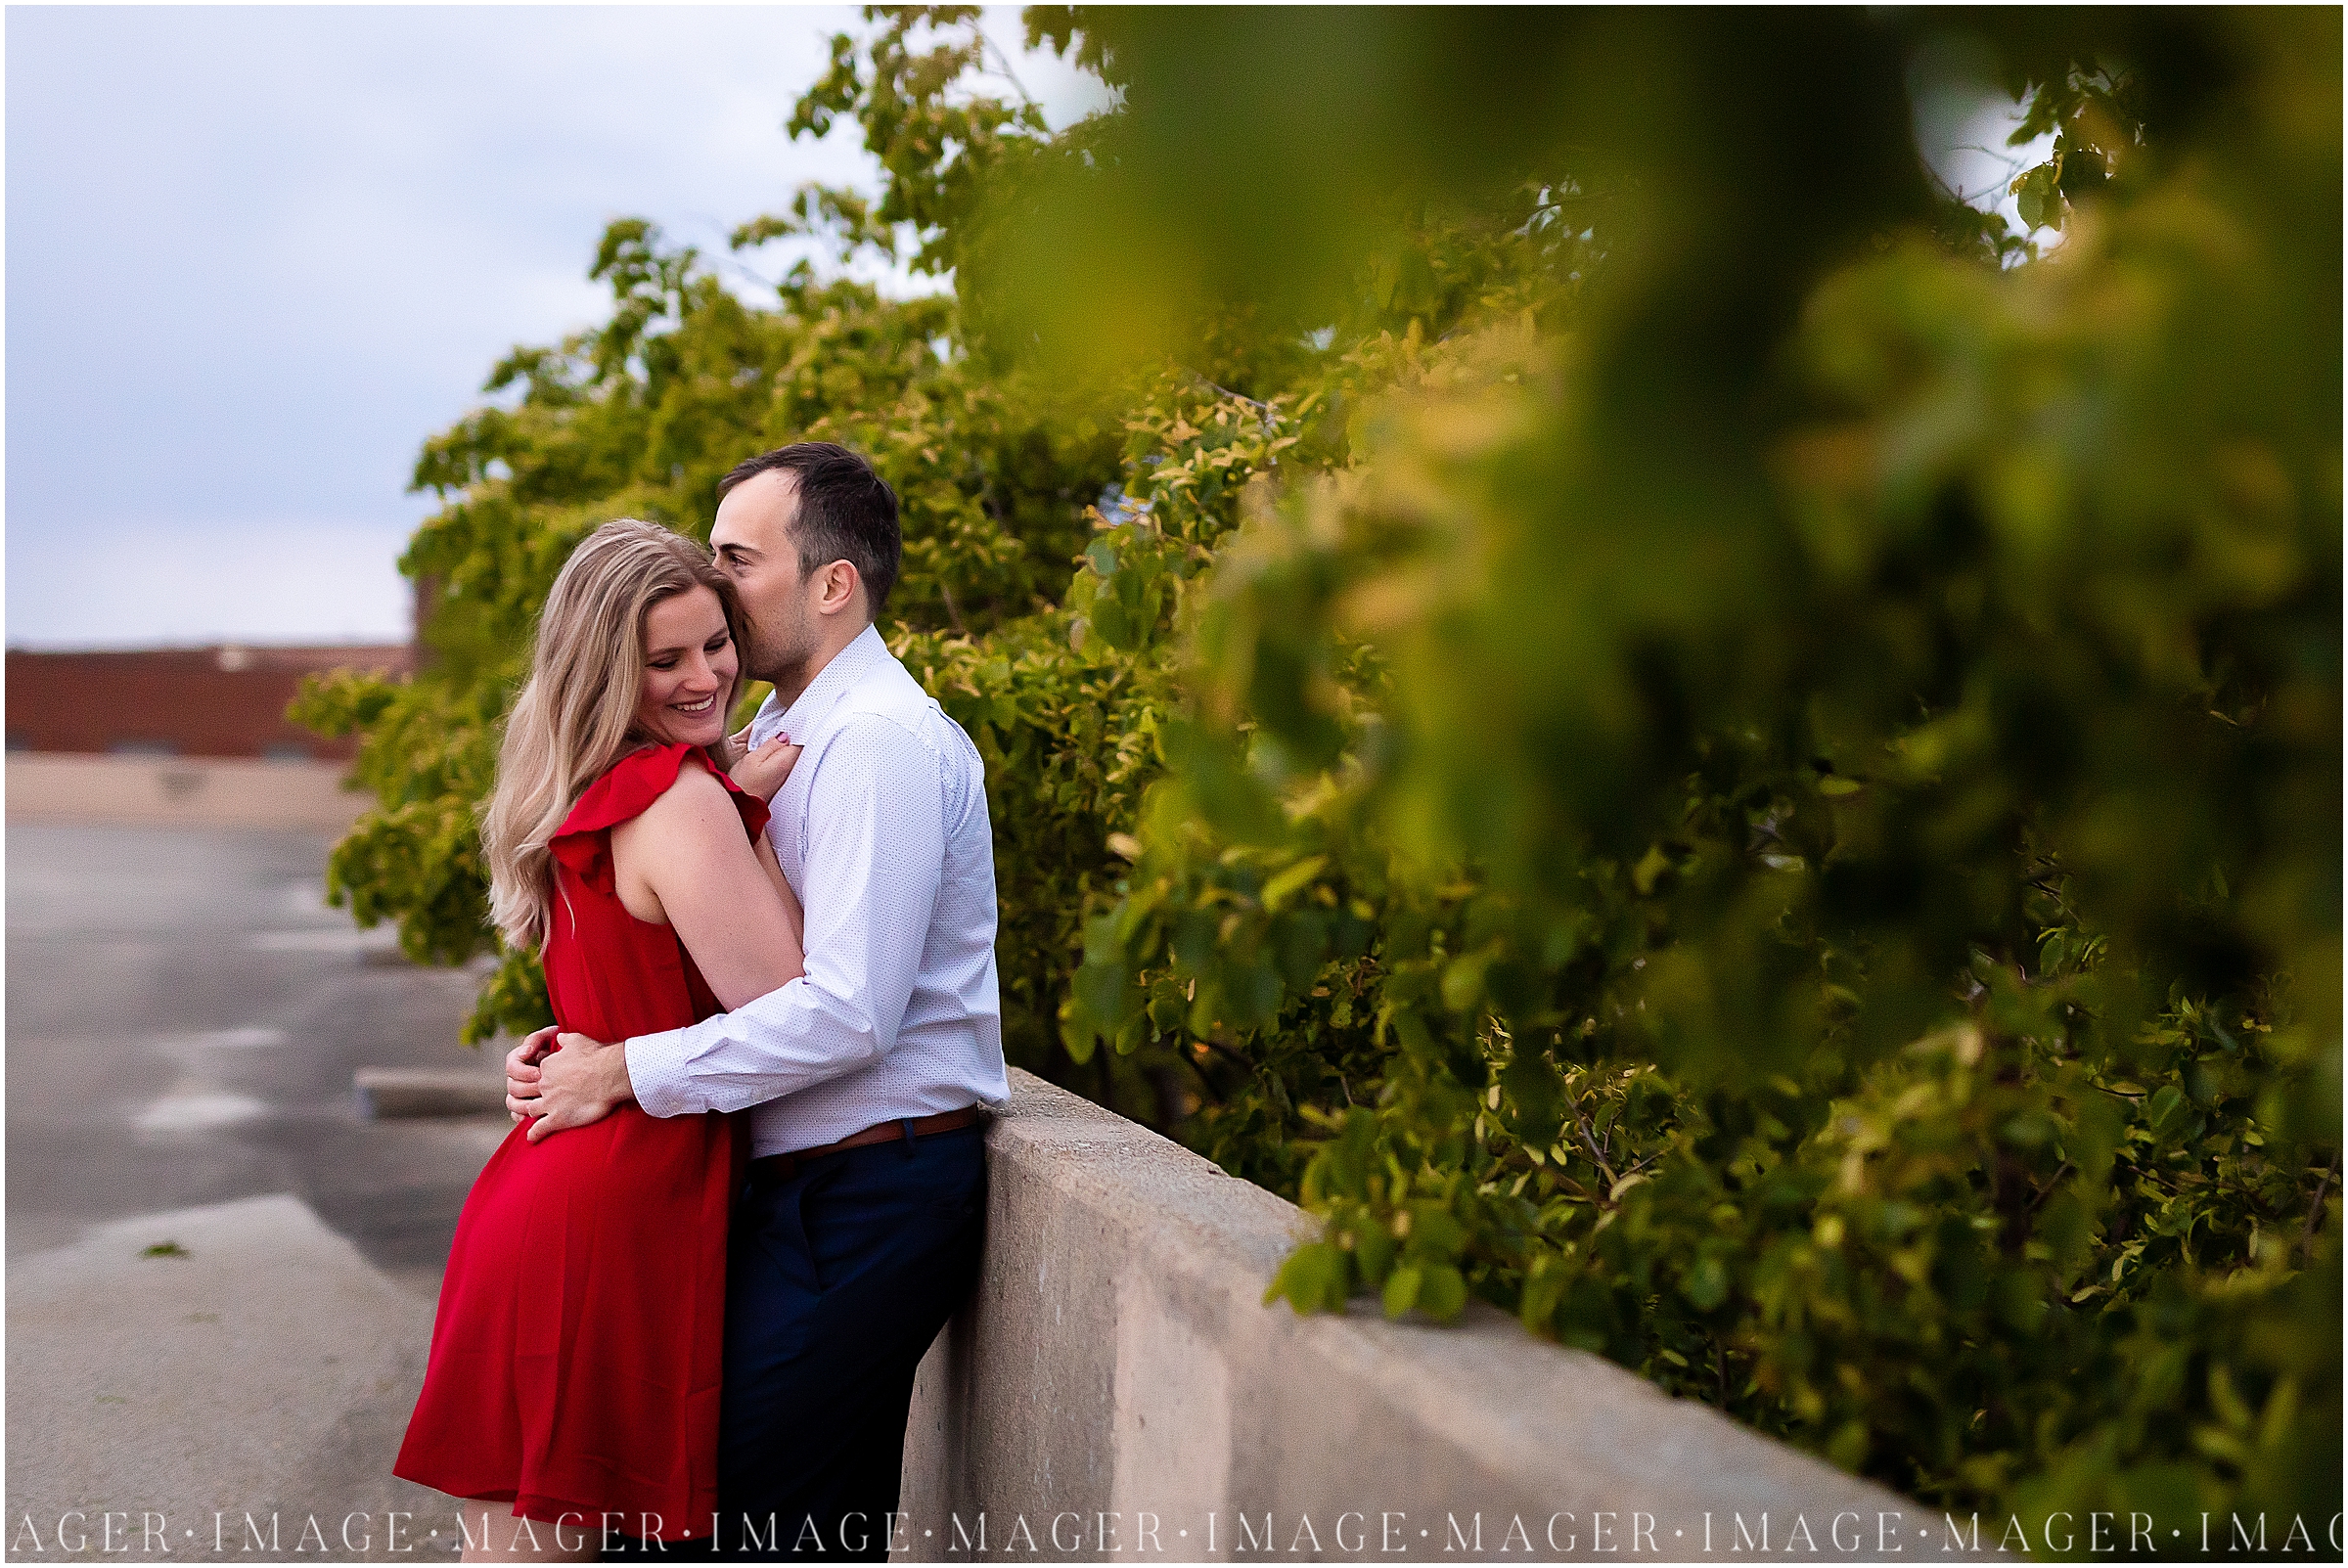 A couple embraces near greenery while leaning against a concrete wall in downtown Danville, IL.

Photo taken by Mager Image Photography 